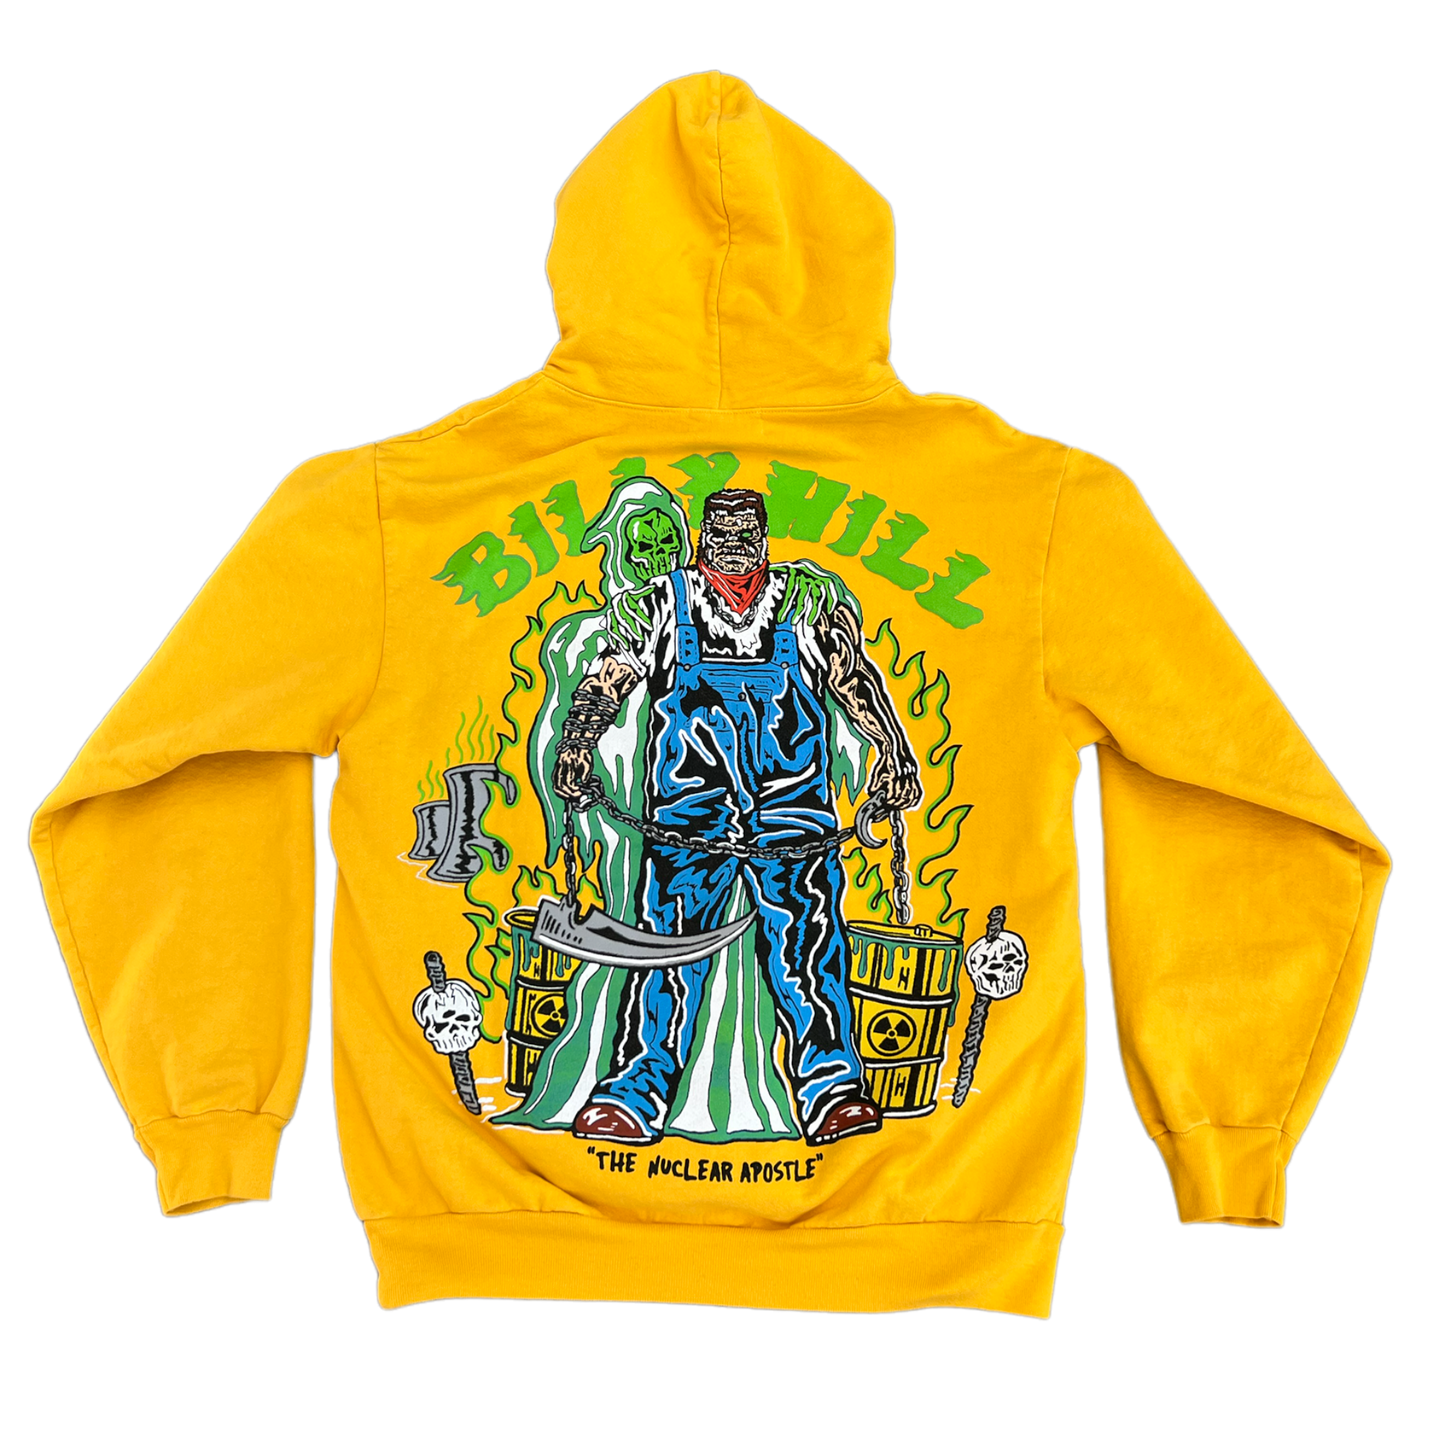 Billy Hill x Warren Lotas - "The Nuclear Apostle" - Yellow Hoodie Size Medium